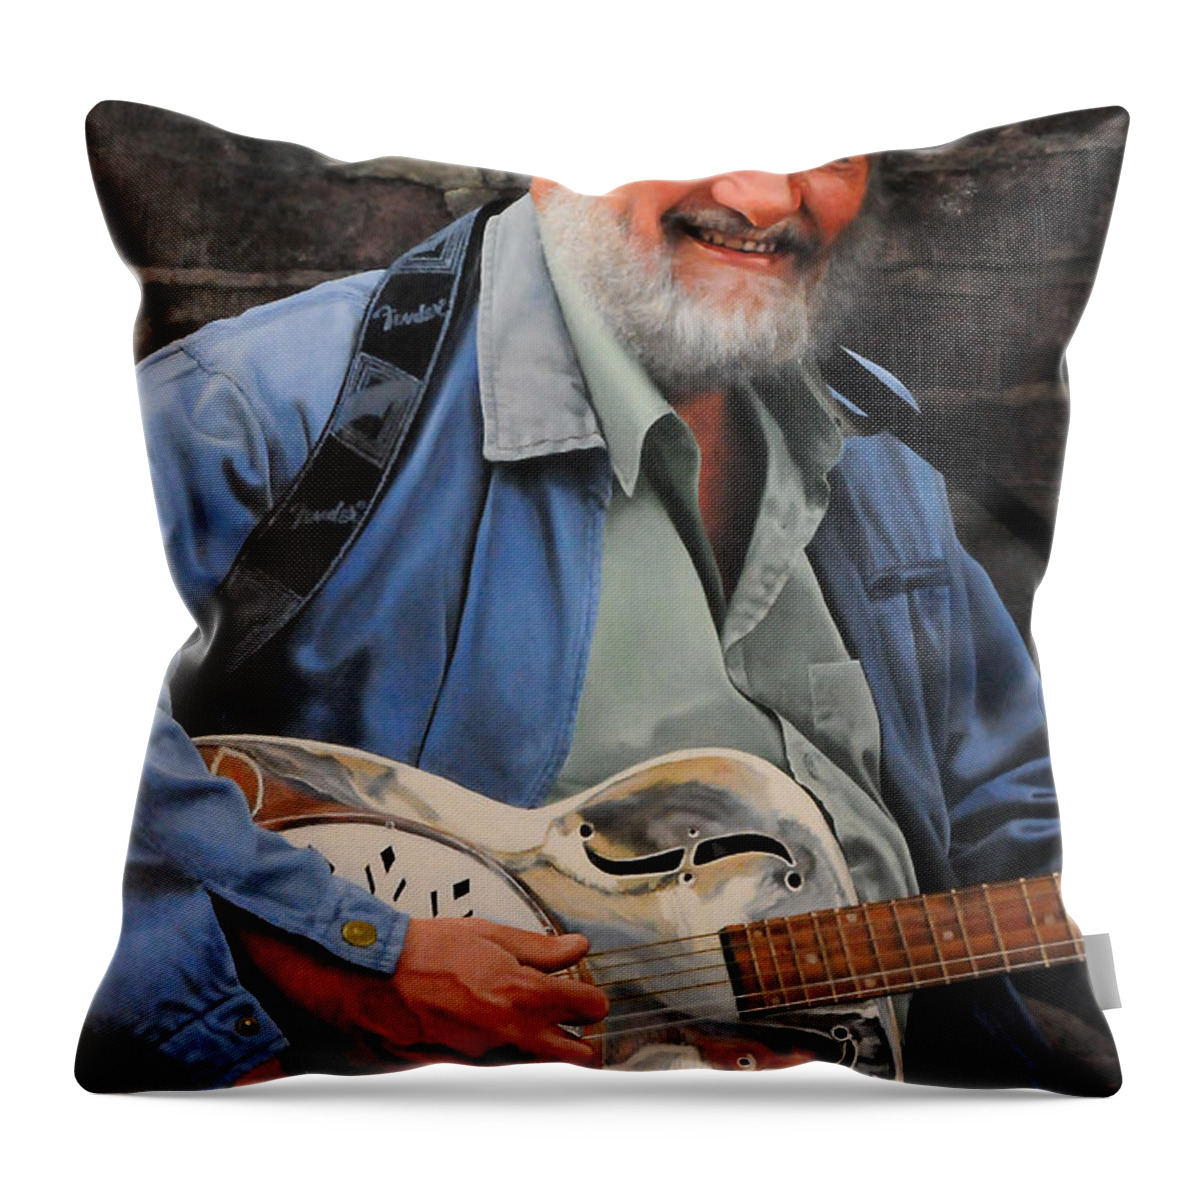 Portrait Throw Pillow featuring the painting The Guitar Player by Harry Robertson